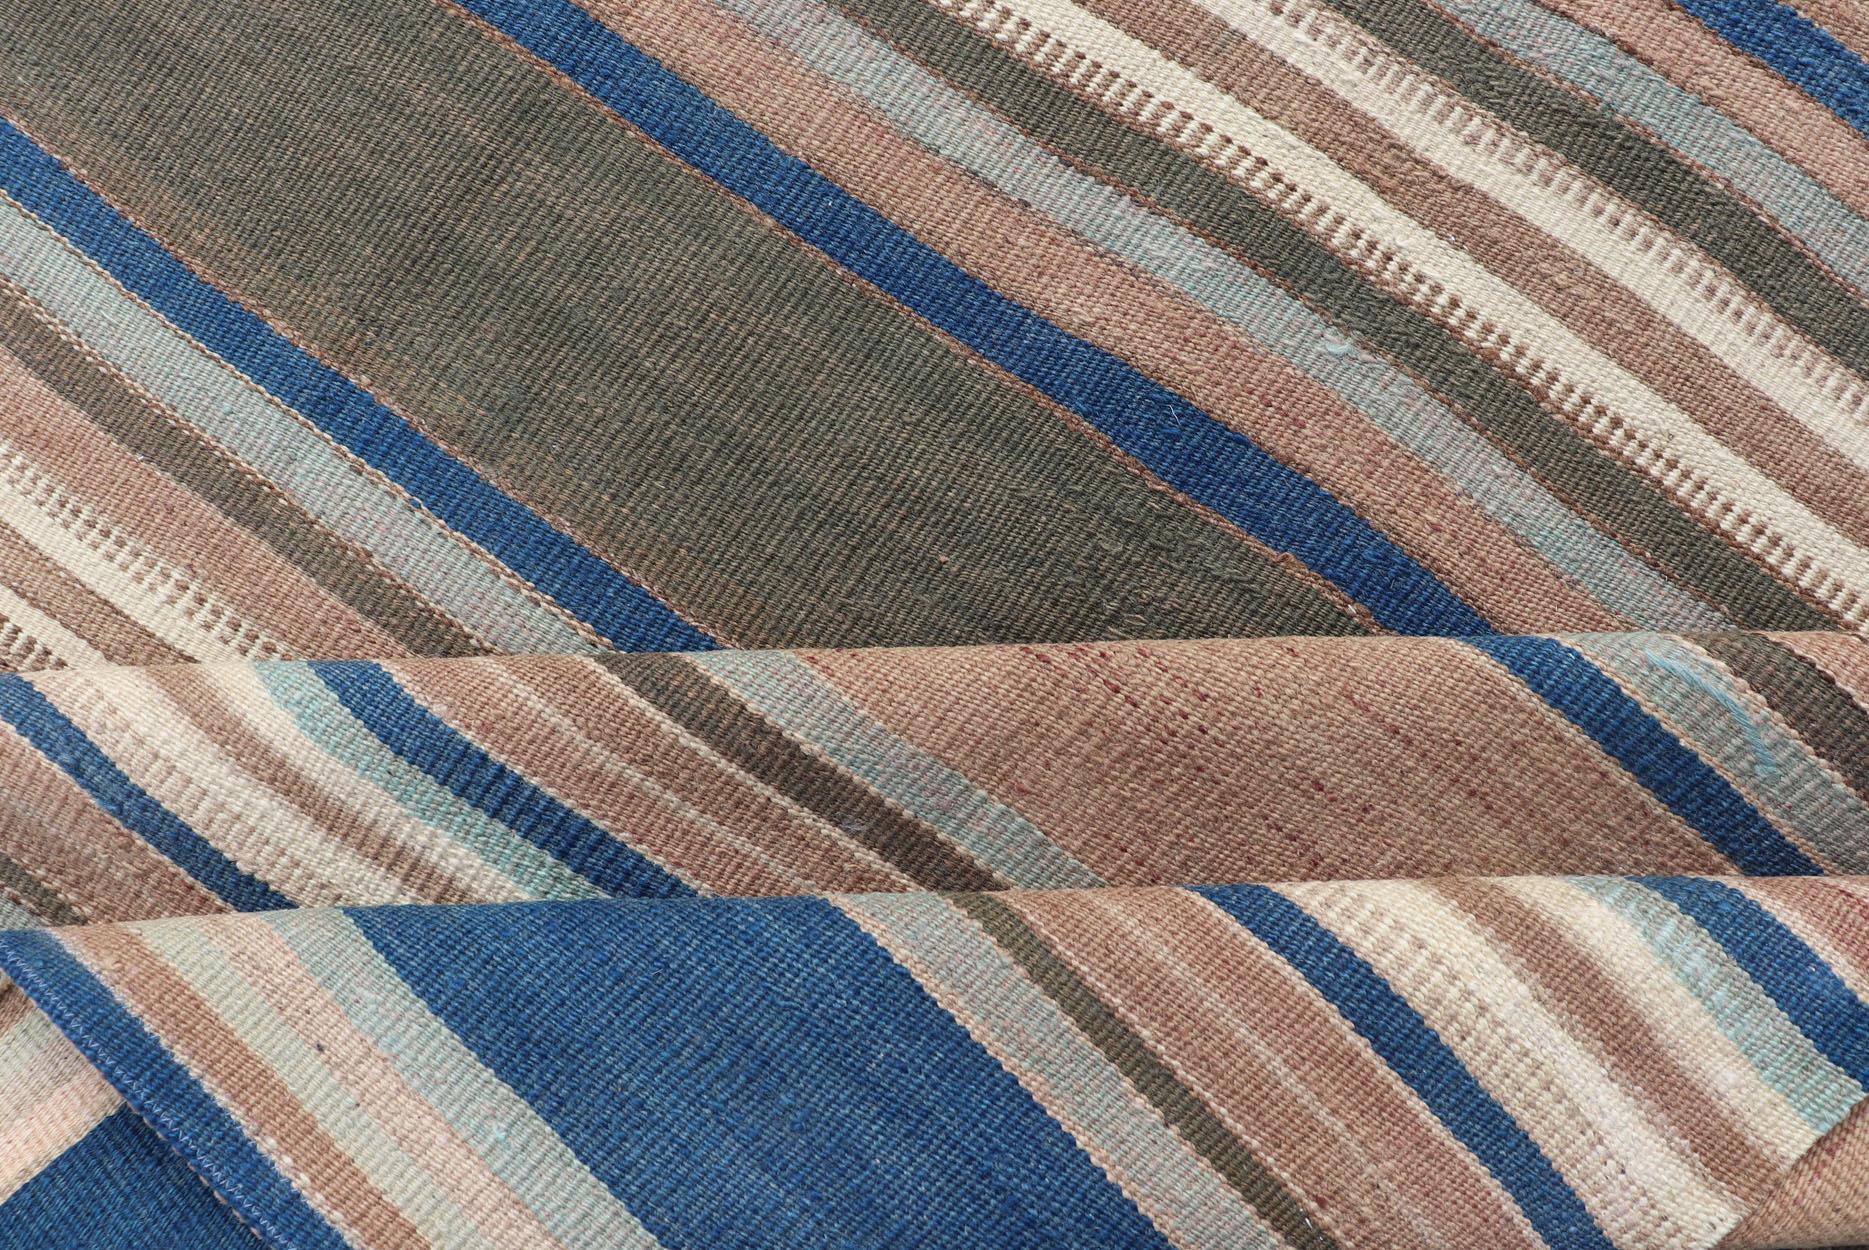 Vintage Turkish Flat-Weave Kilim with Blue's, Brown, & Taupe in Striped Design For Sale 4